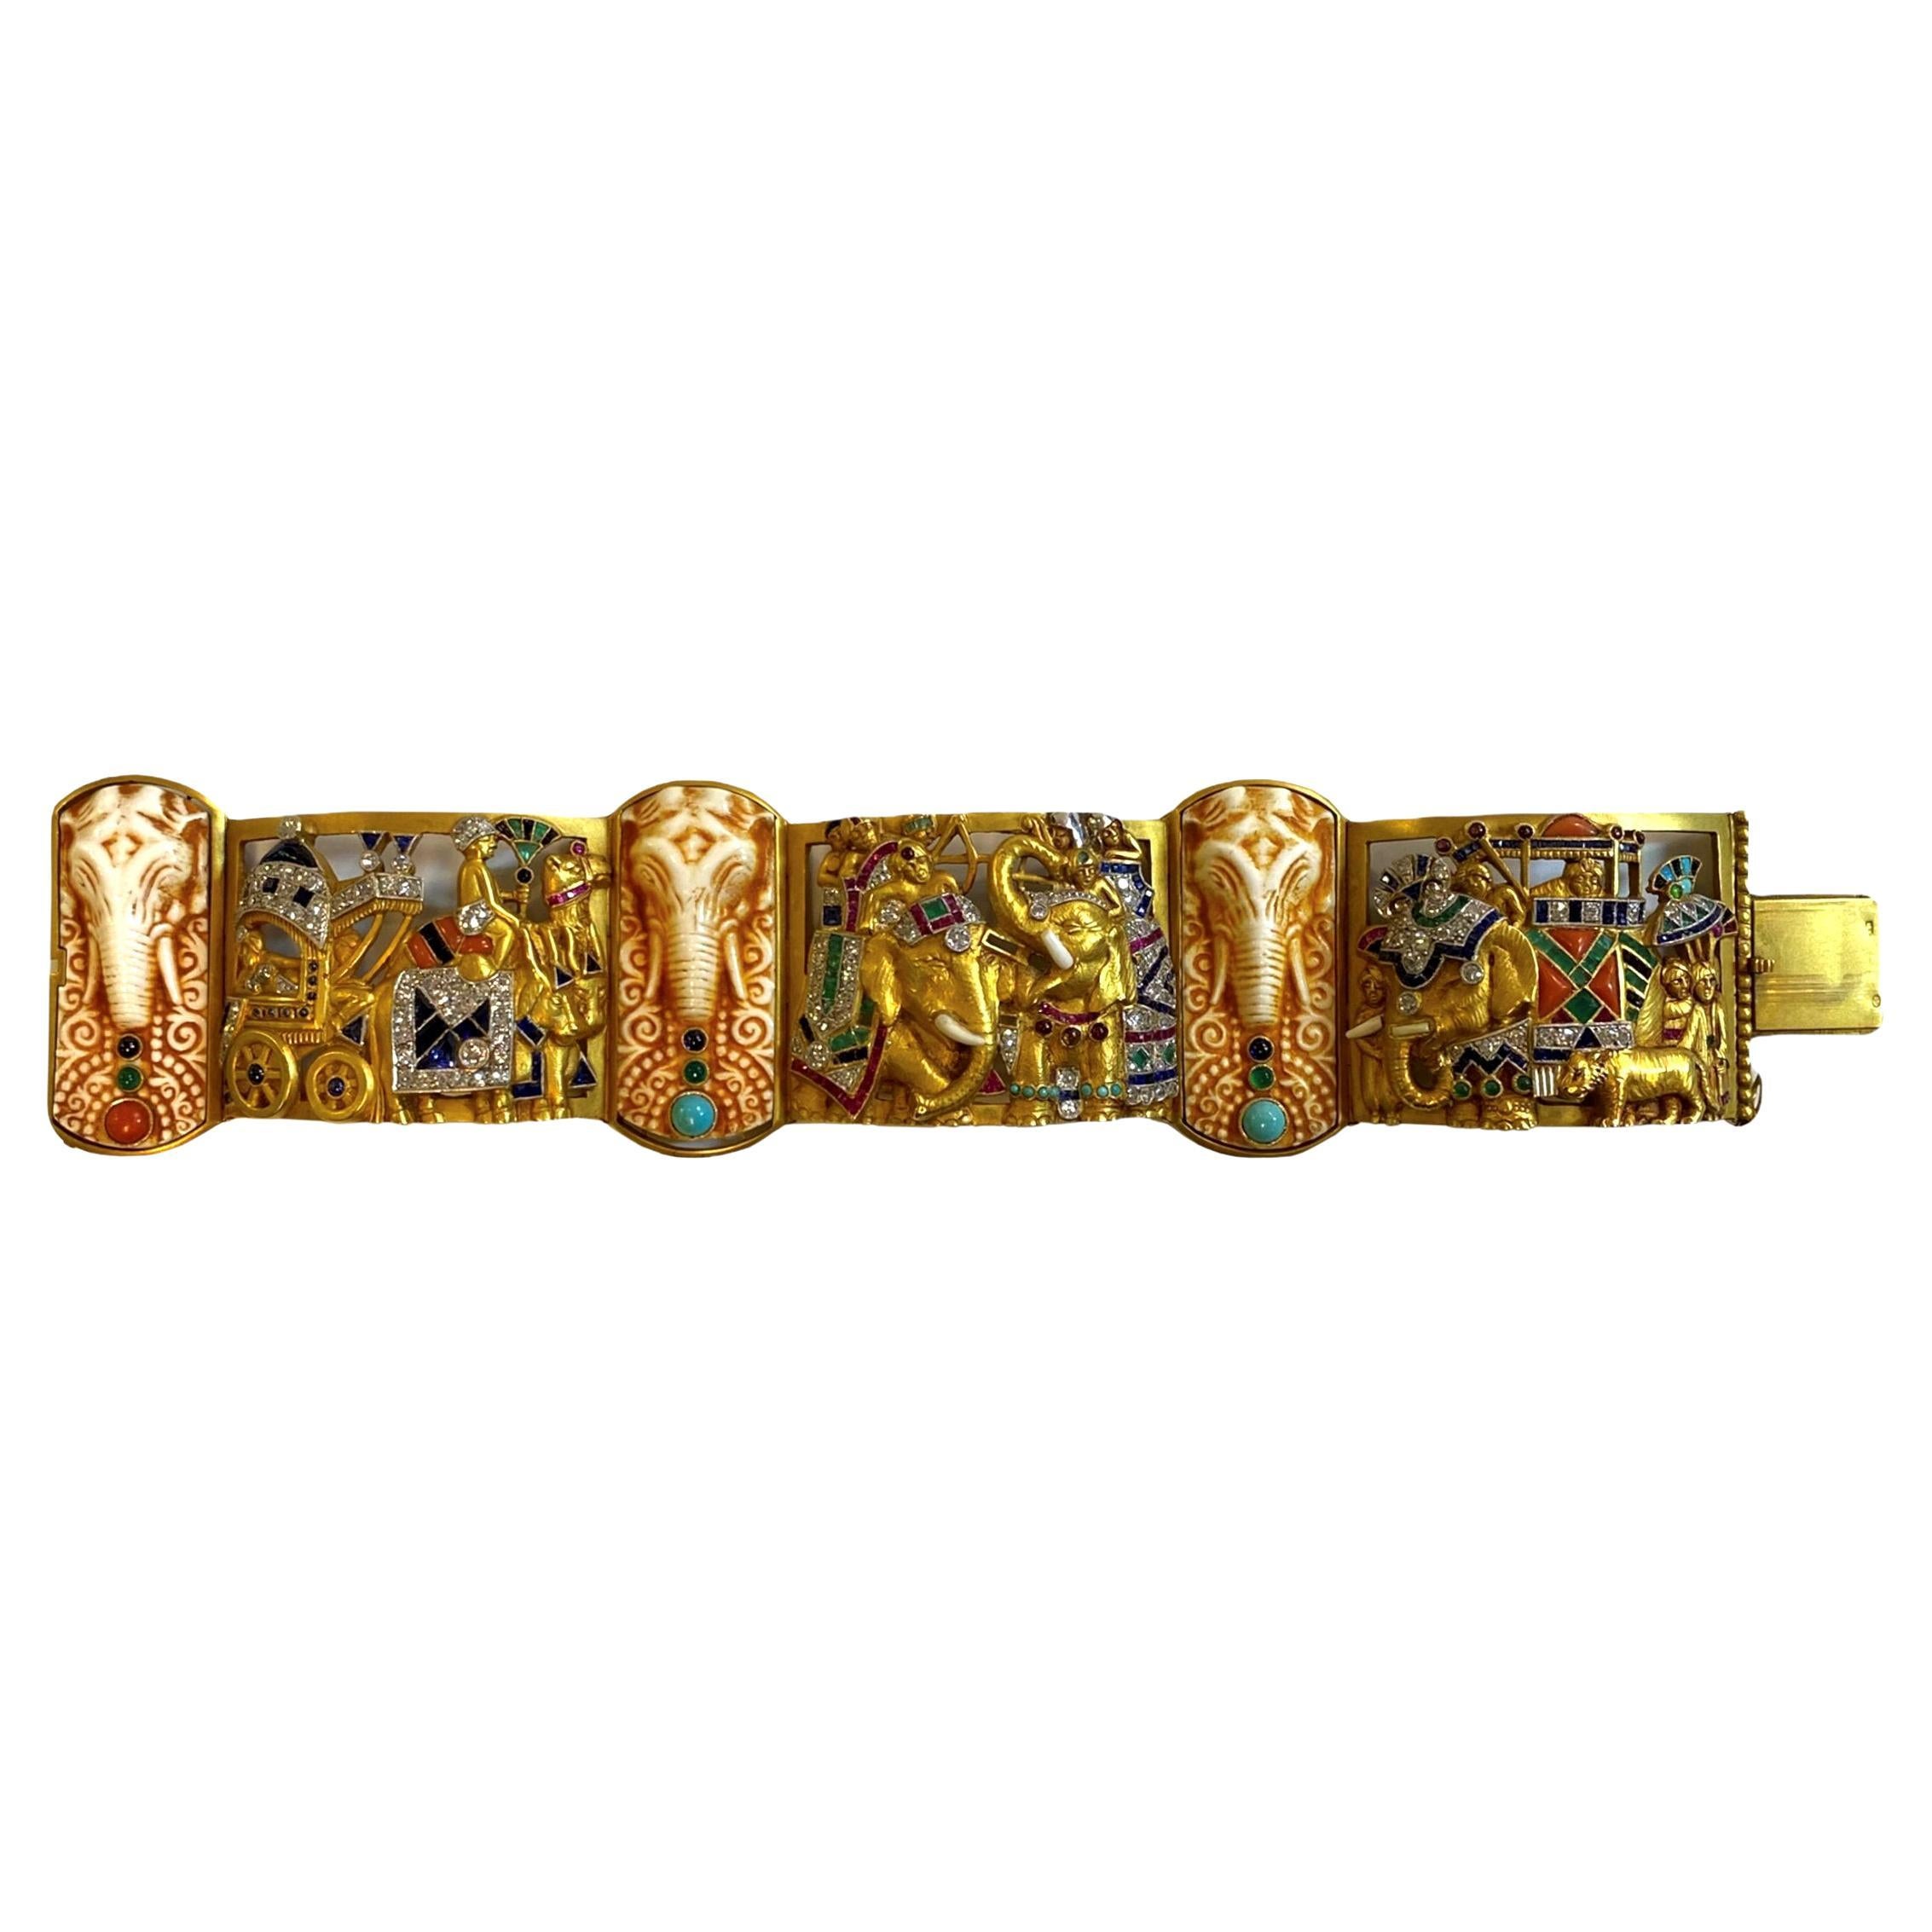 Our extraordinary 18k gold, gem-set and diamond bracelet by Fuset y Grau, circa 1930, depicts a ceremonial procession of Indian royalty including riders in howdahs on elephants, carriage drawn by oxen plus attendants and other animals including